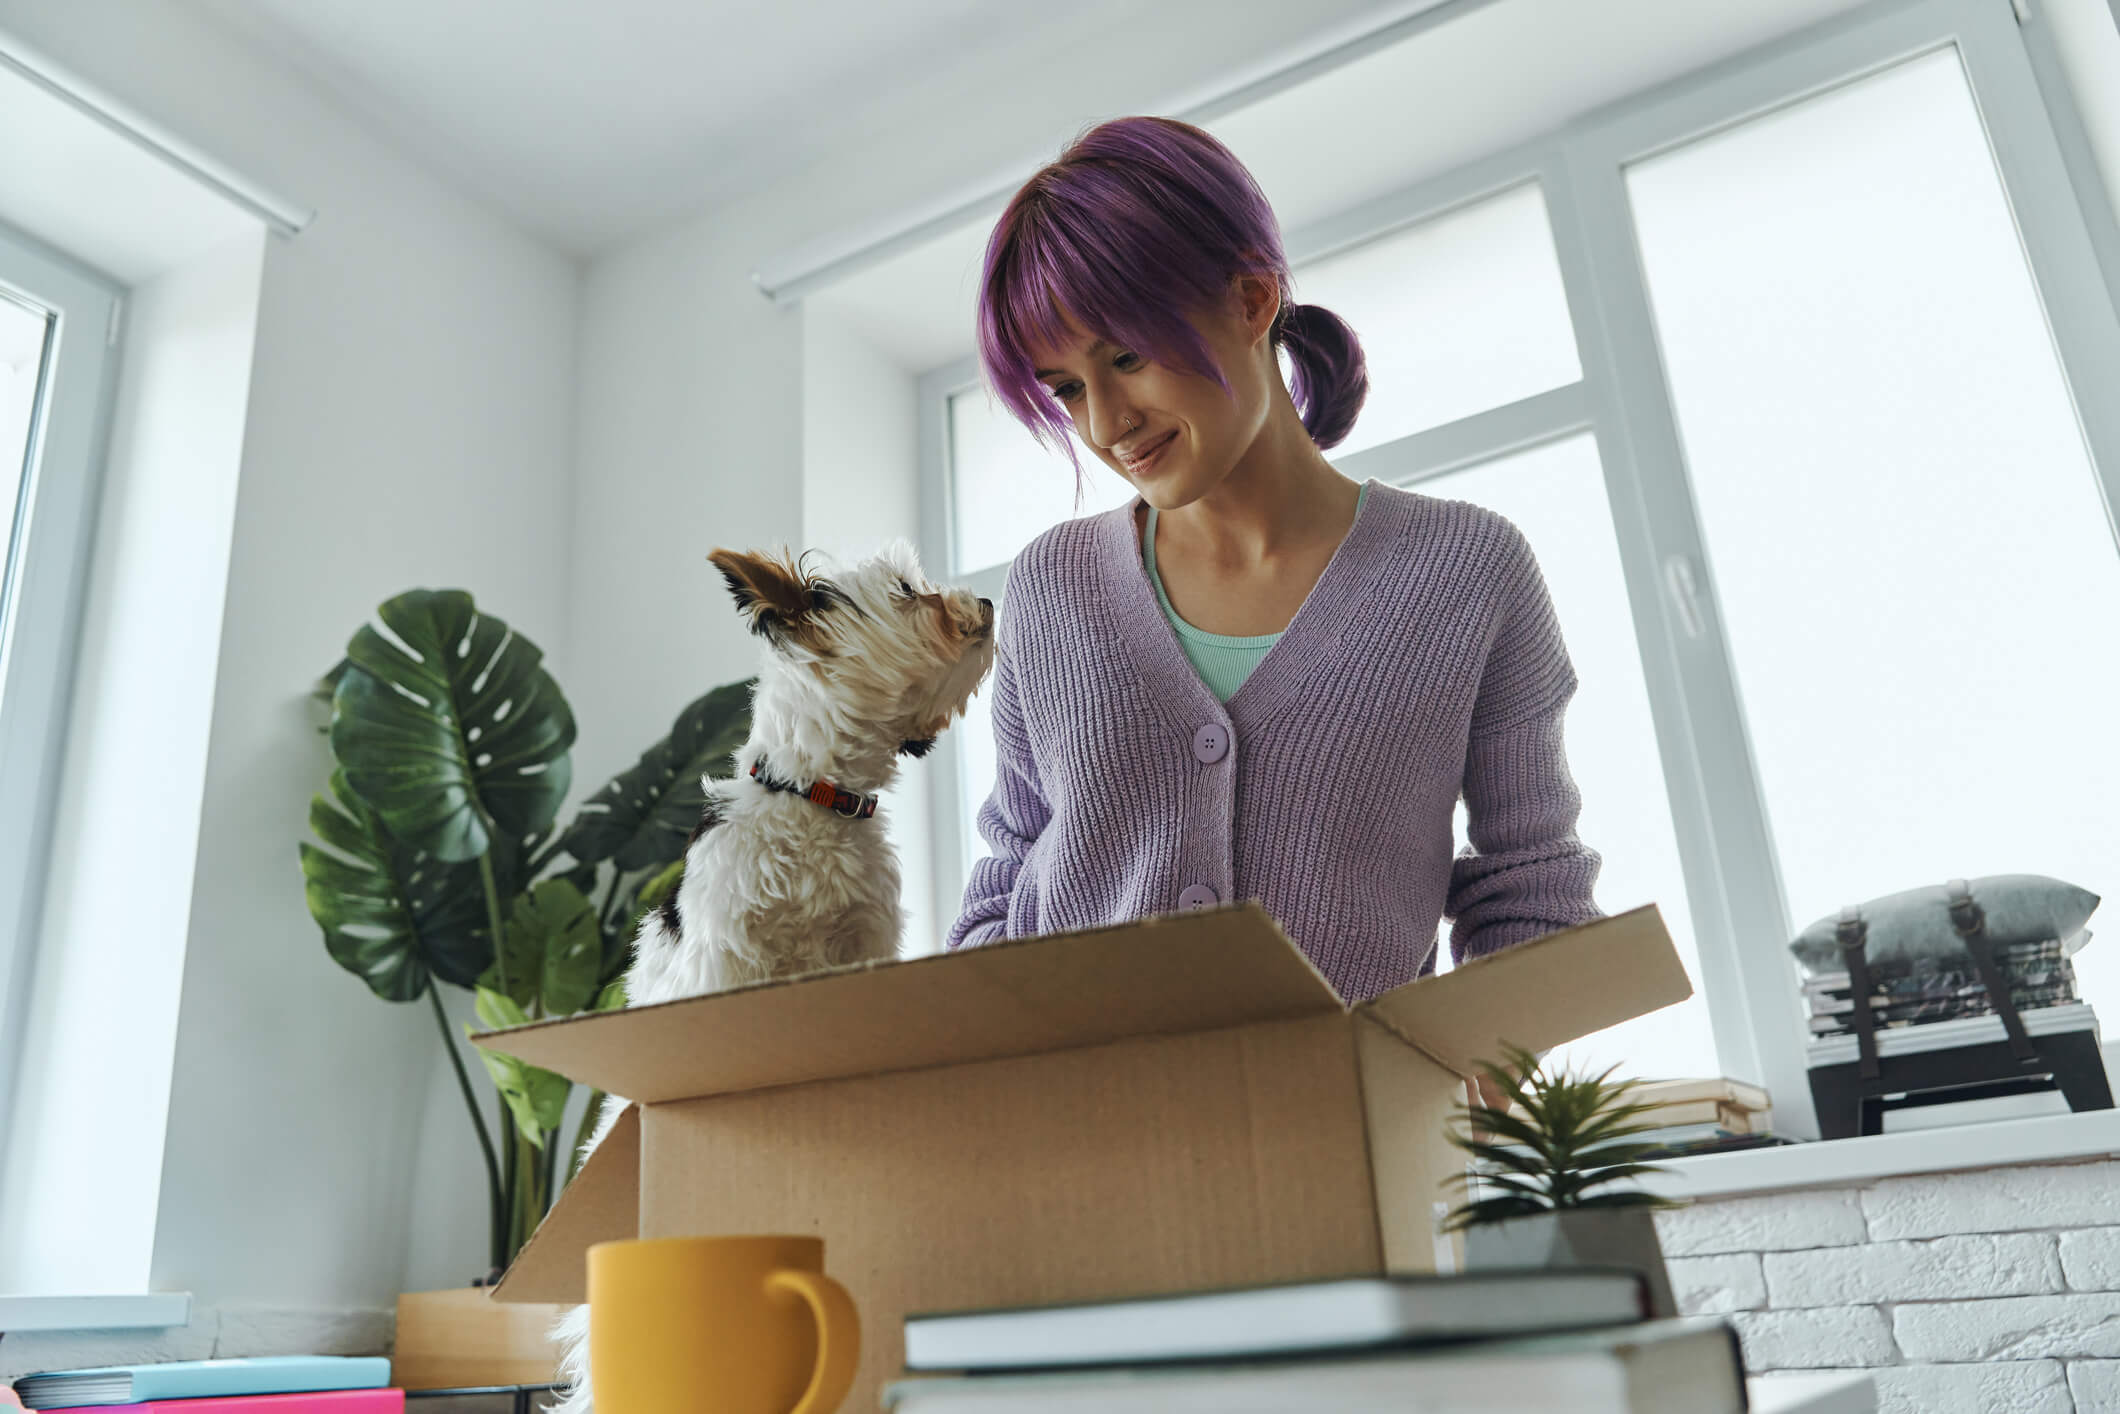 Young woman unpacks box while her small dog watches